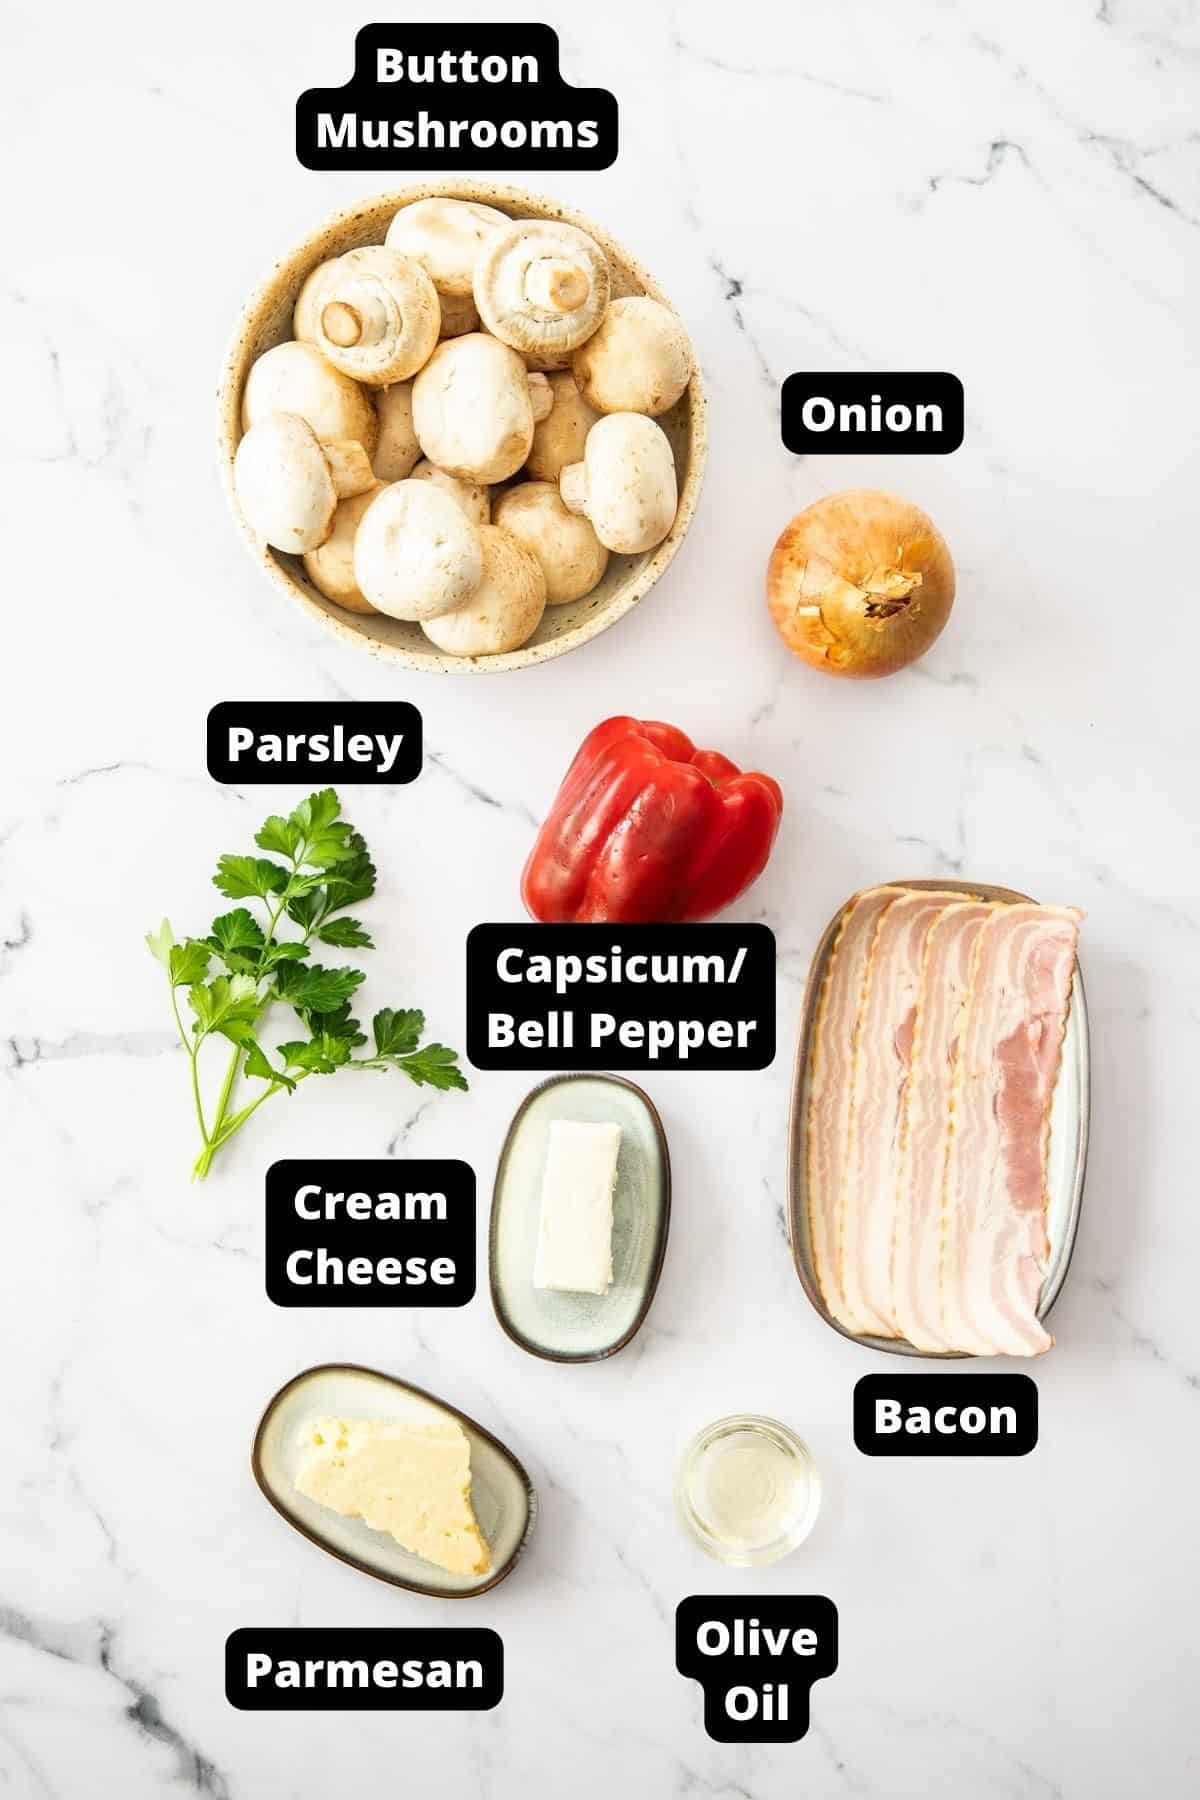 Ingredients in this recipe on a white marble background.